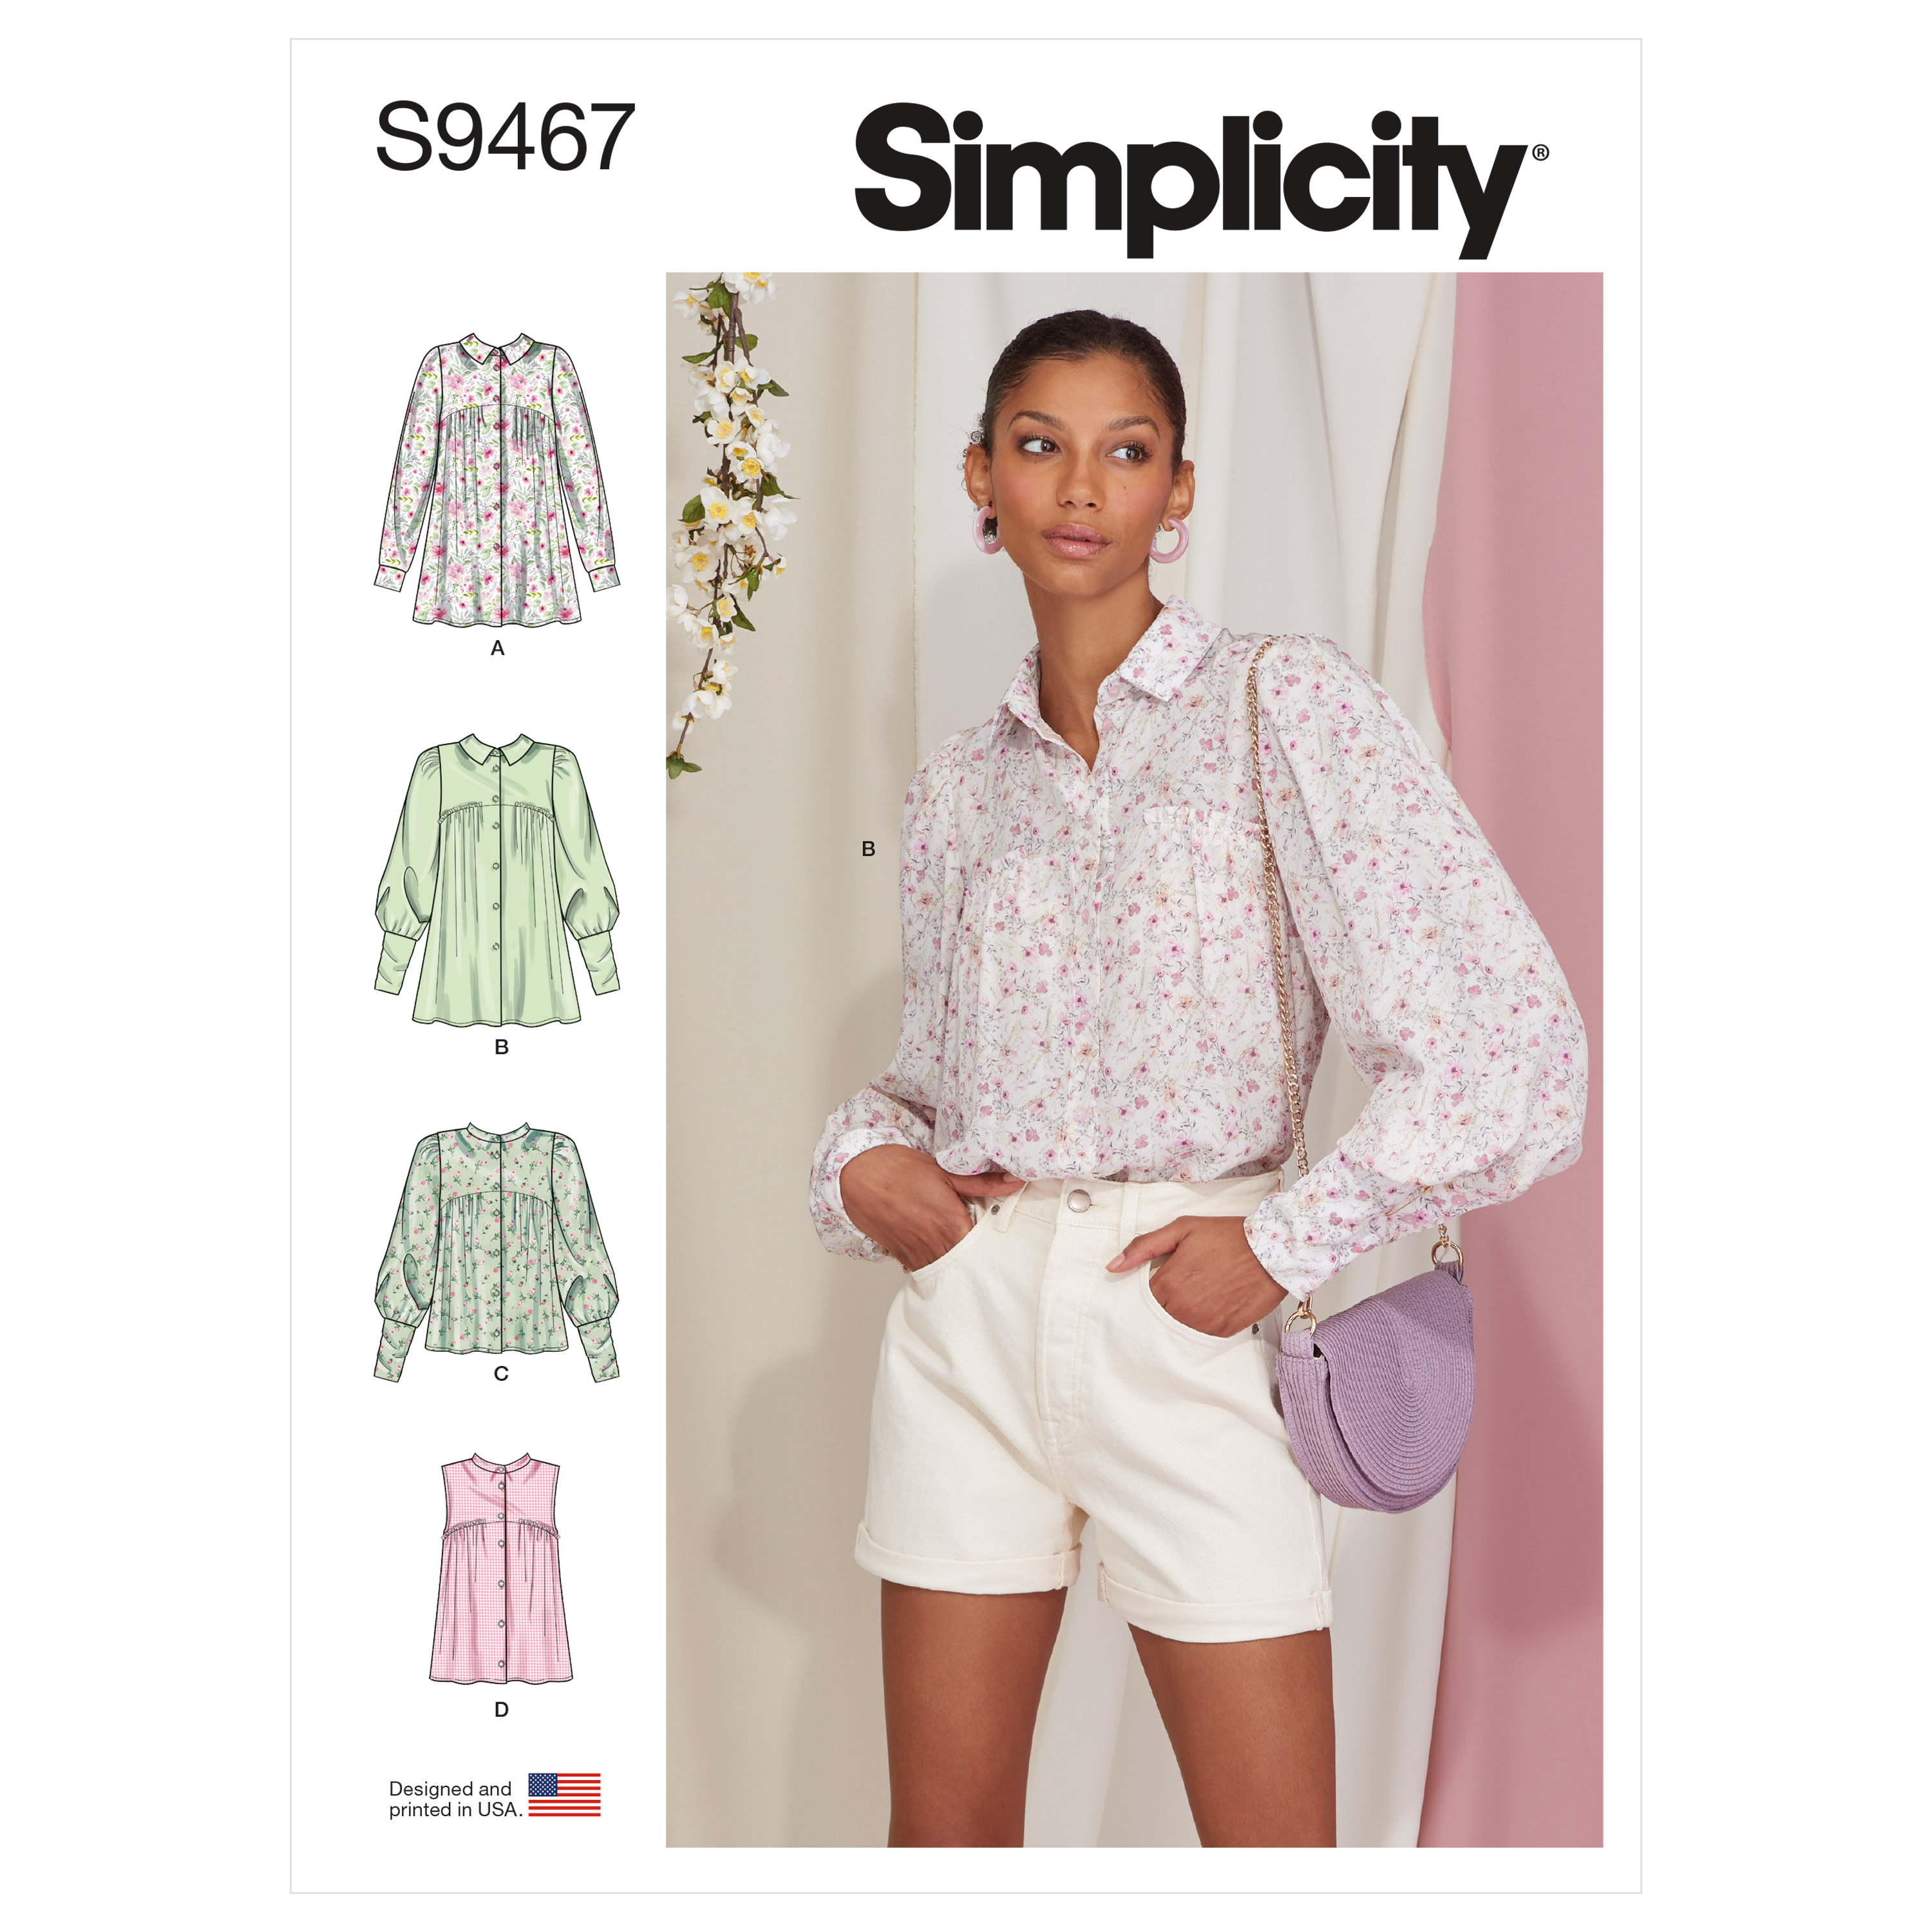 https://images.patternreview.com/sewing/patterns/simplicity/2022/9467/9467.jpg